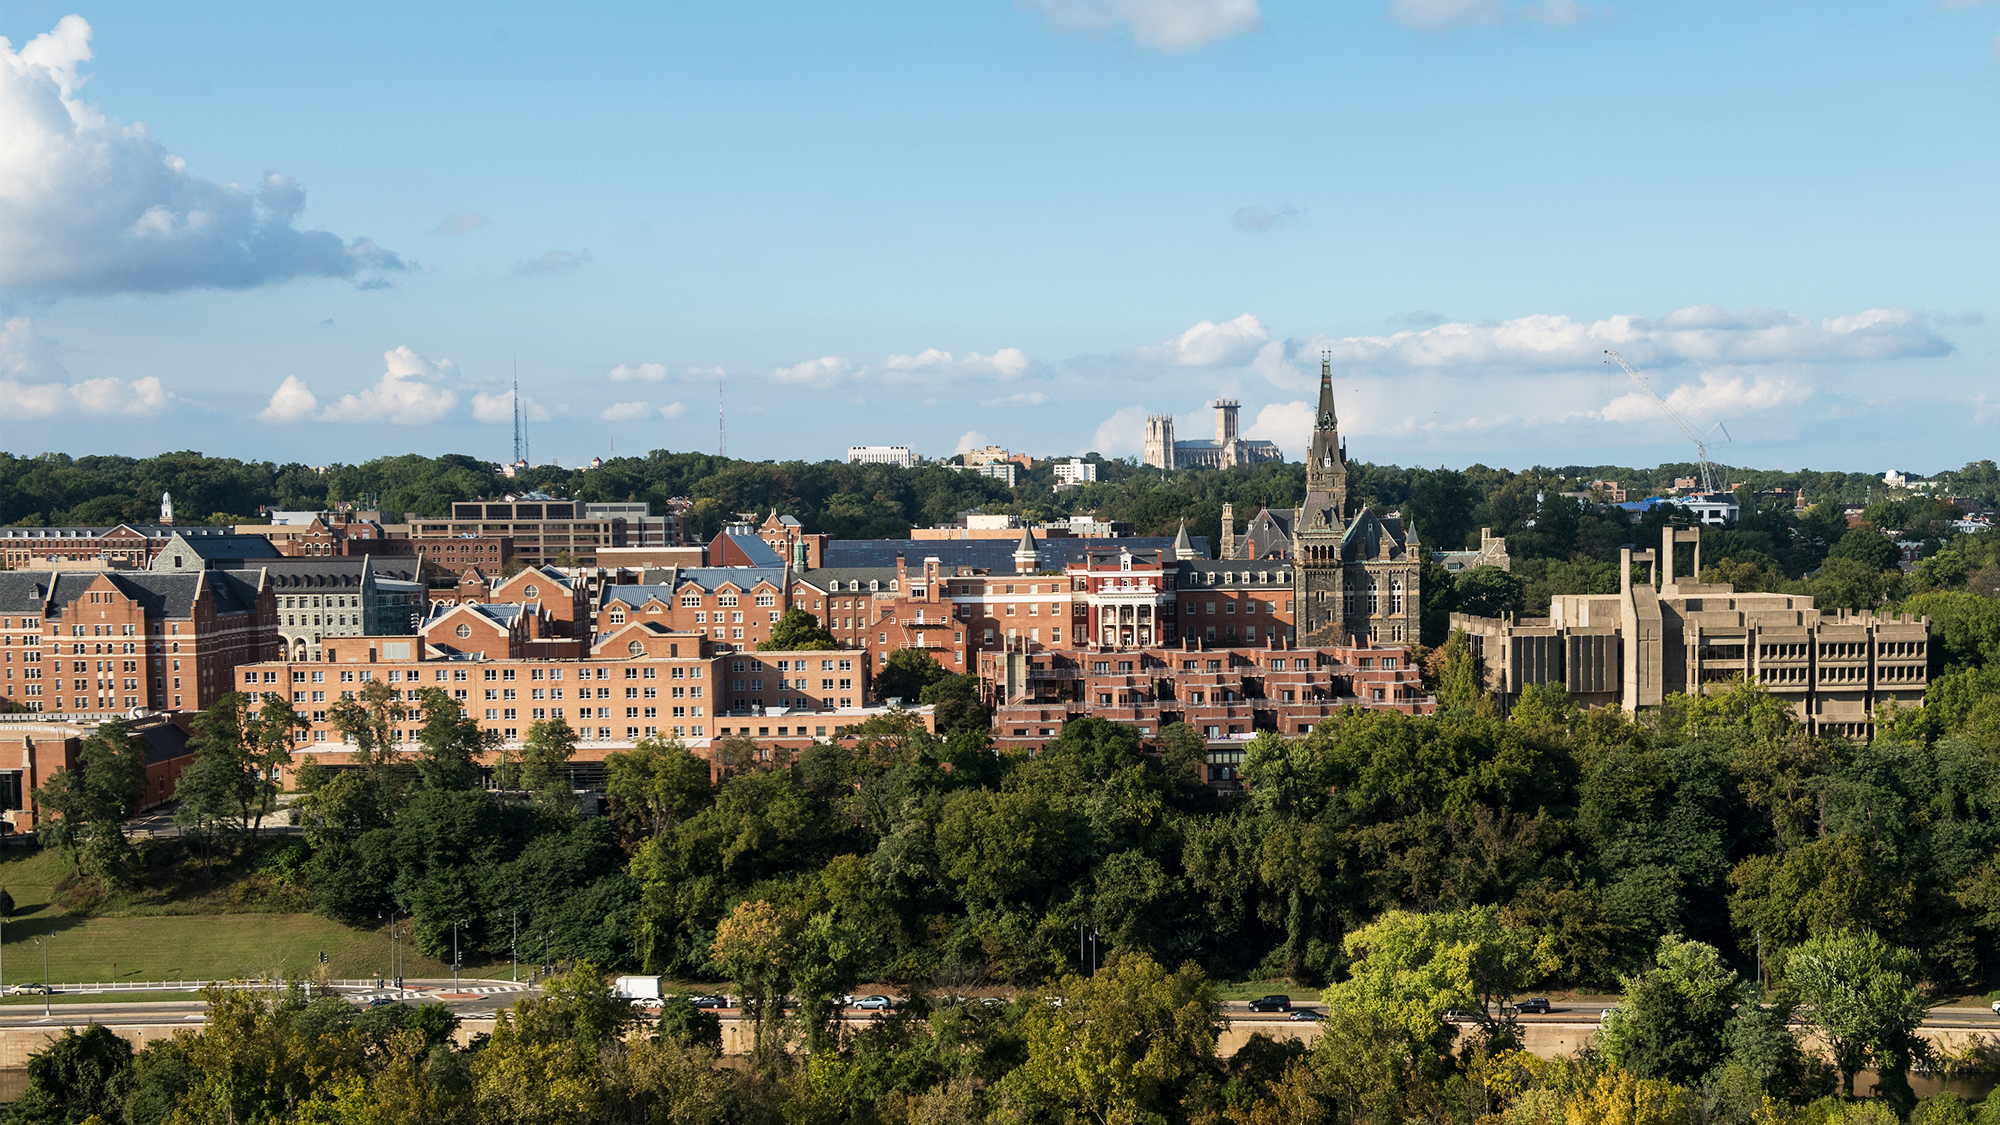 Georgetown campus overview from afar